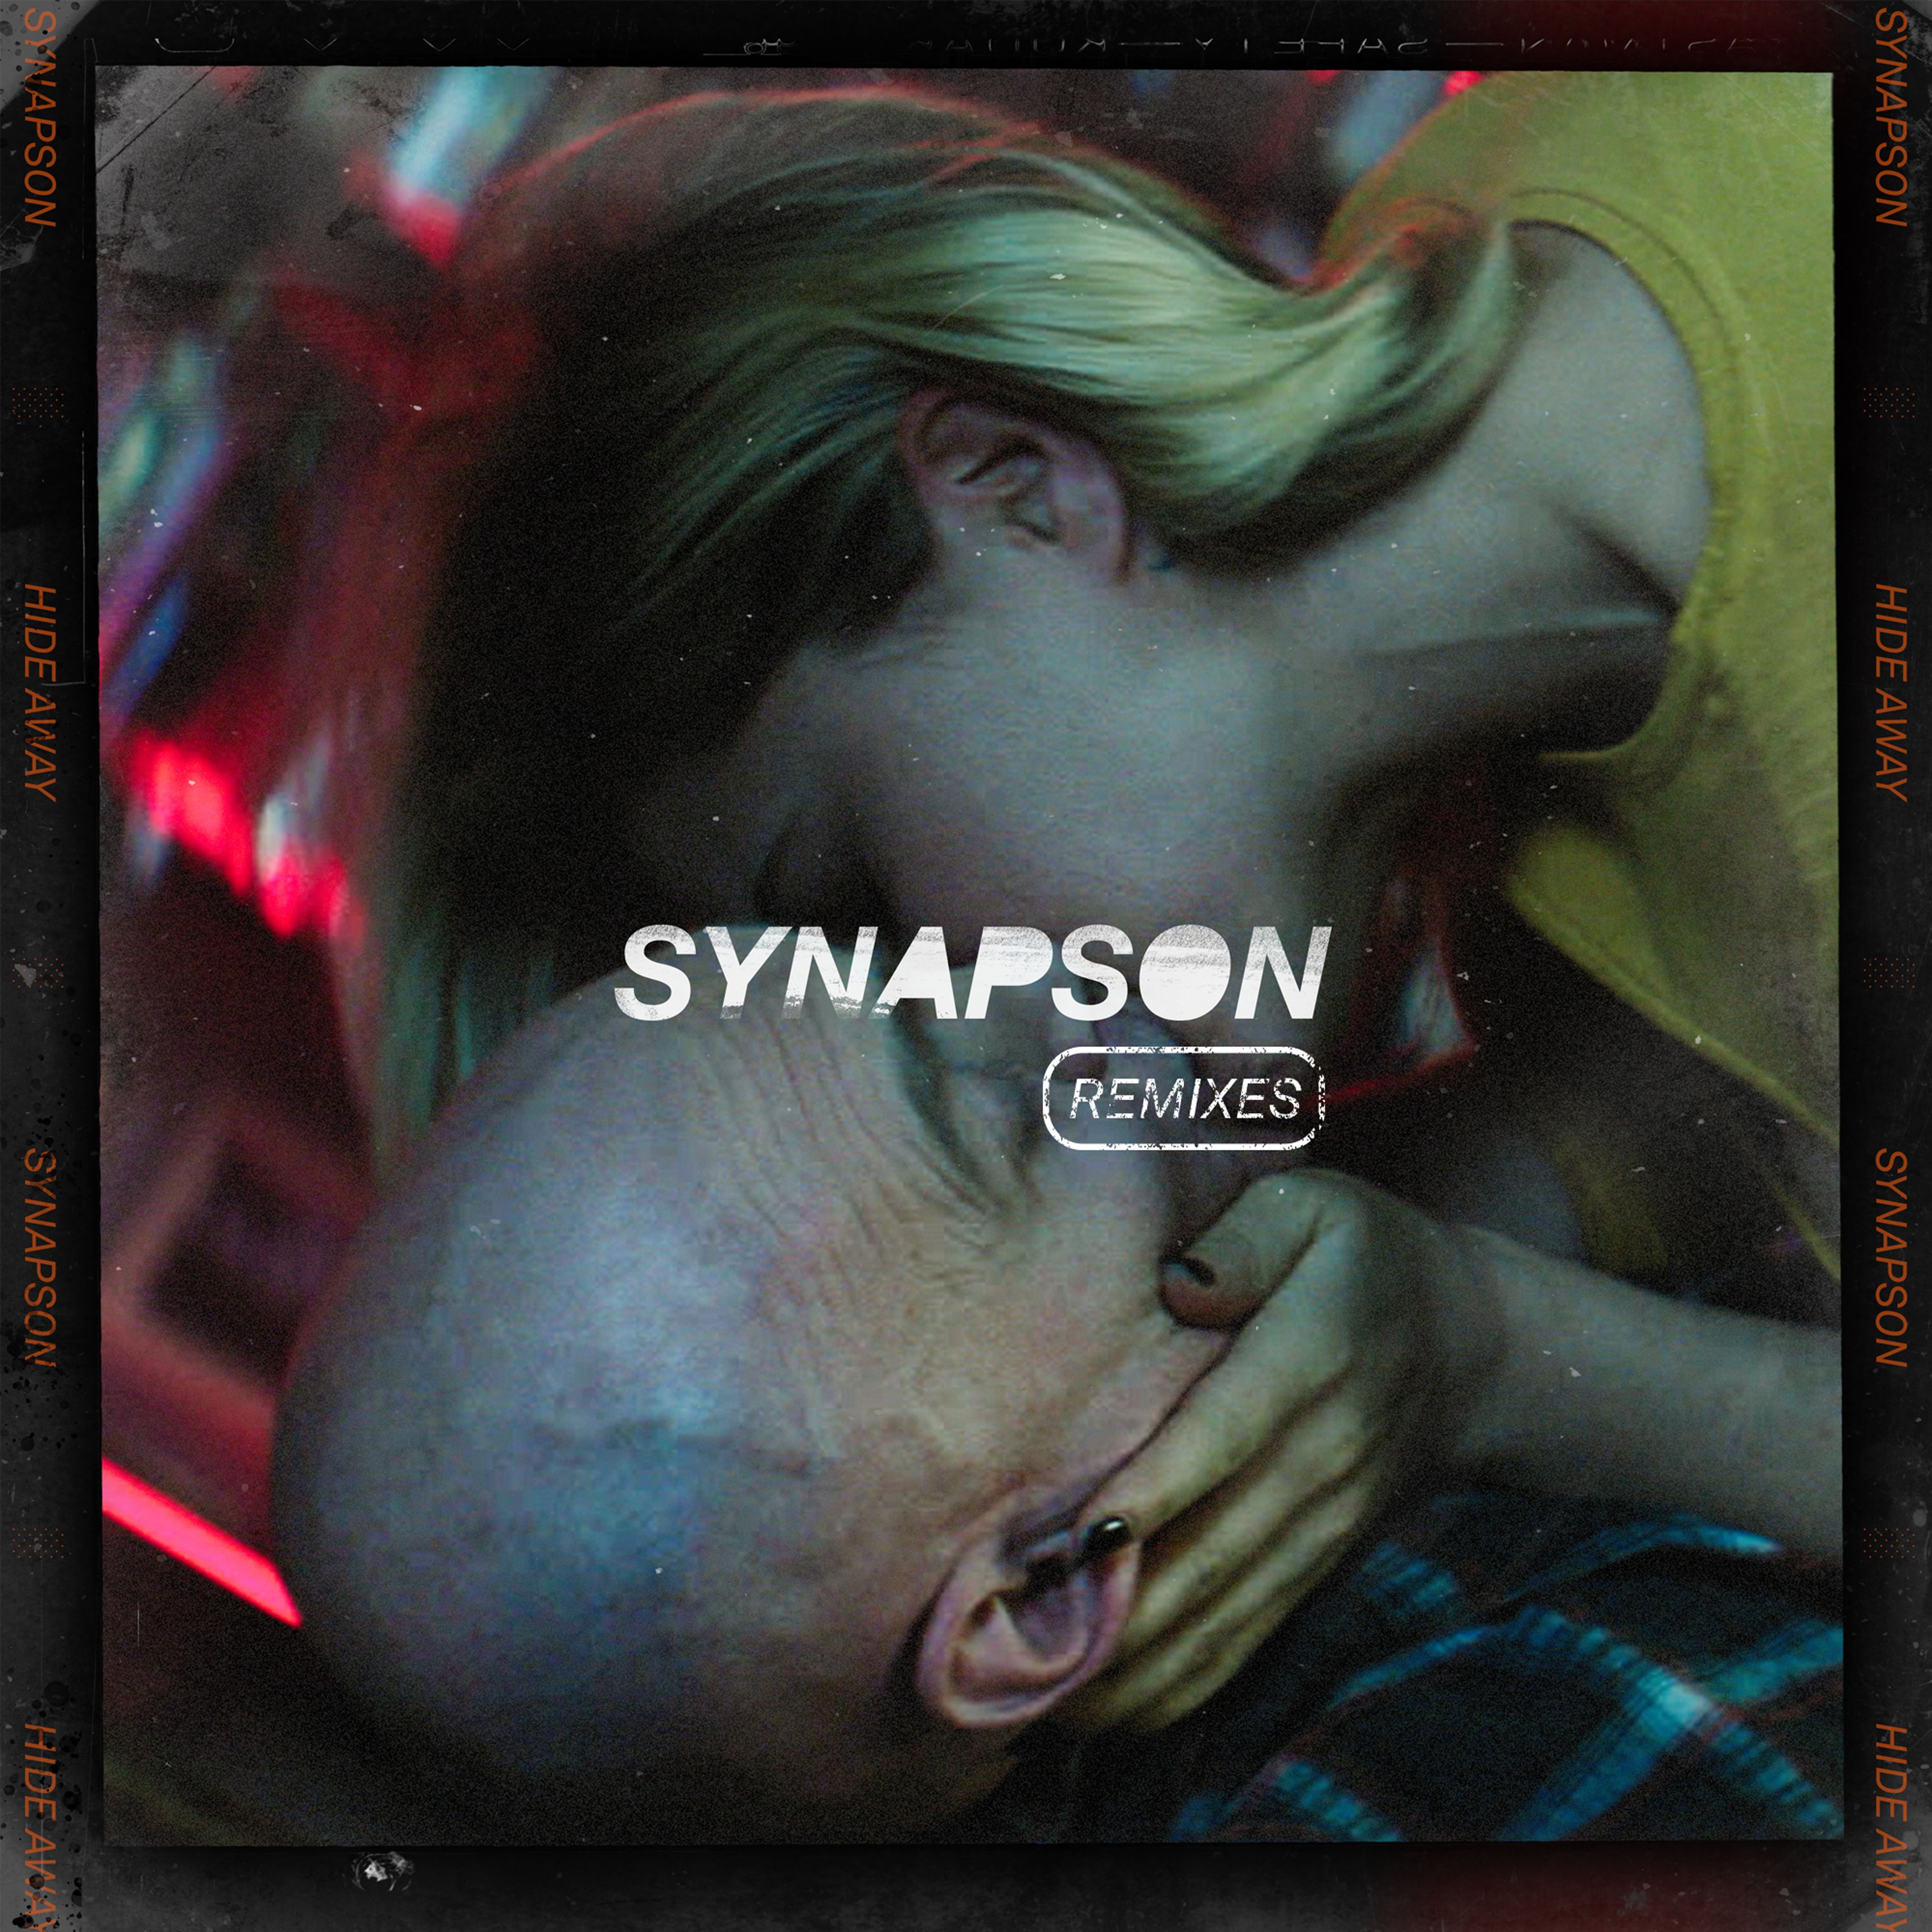 Hideaway synapson. Hide away Synapson,Holly. Synapson - Hide away (feat. Holly). Synapson & Holly Martin - Hide away. Synapson Hide.